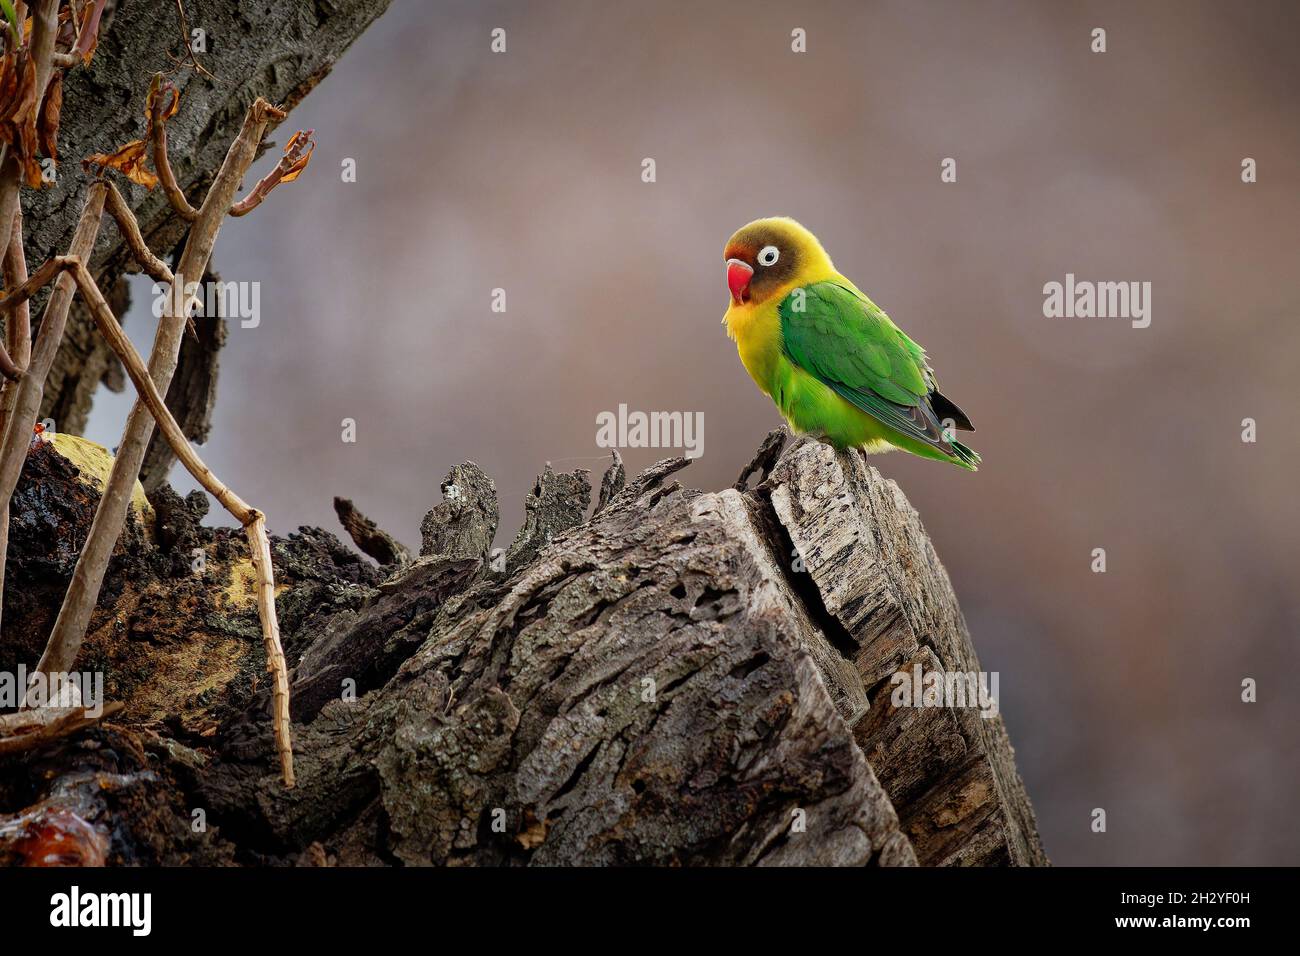 Fischers Lovebird - Agapornis fischeri small parrot bird, green back, chest and wings, necks are a golden yellow and upward it becomes darker orange, Stock Photo